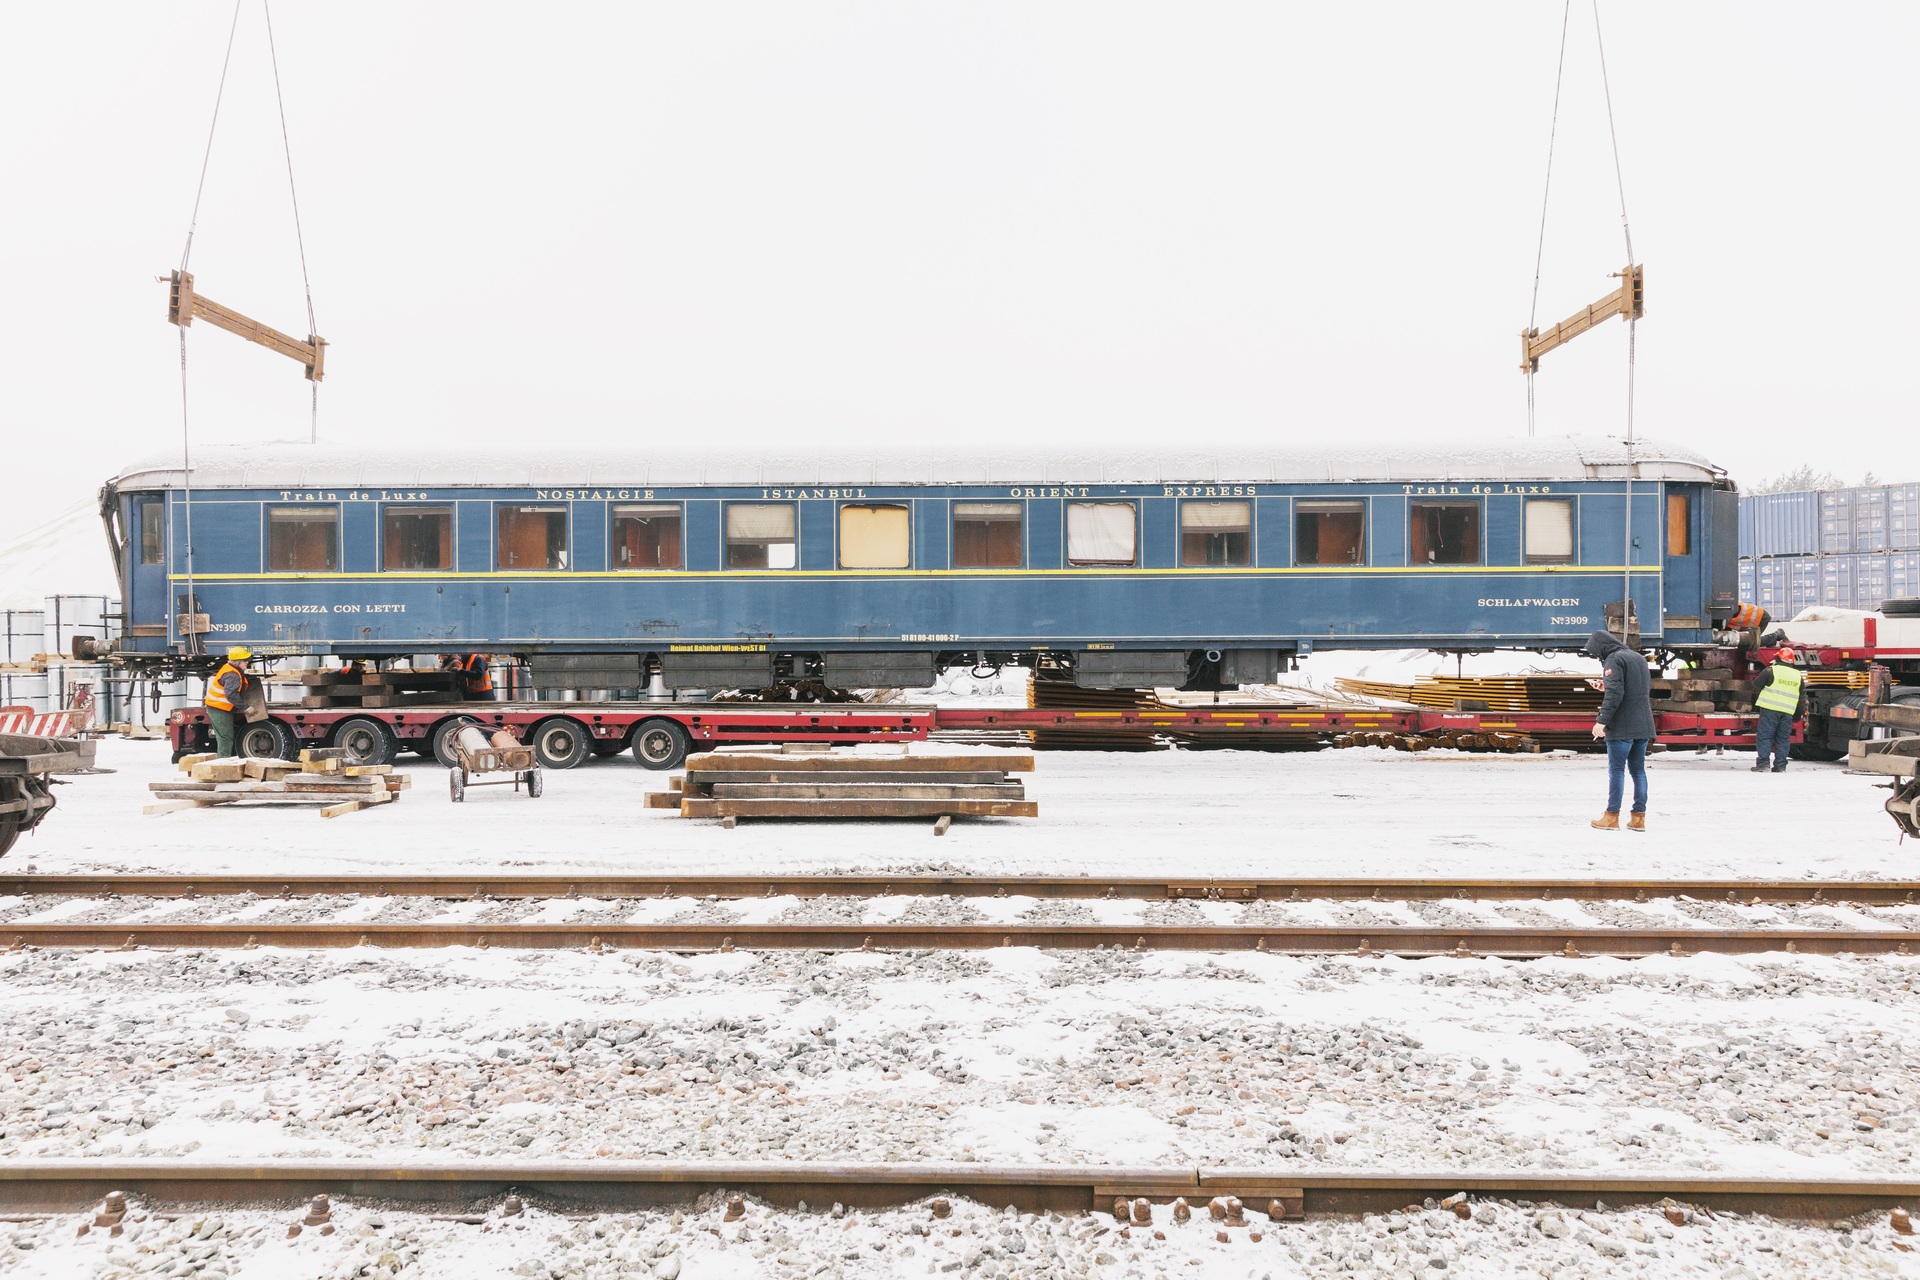 Locomotives for the Orient Express - Rolling Stock - JNS Forum